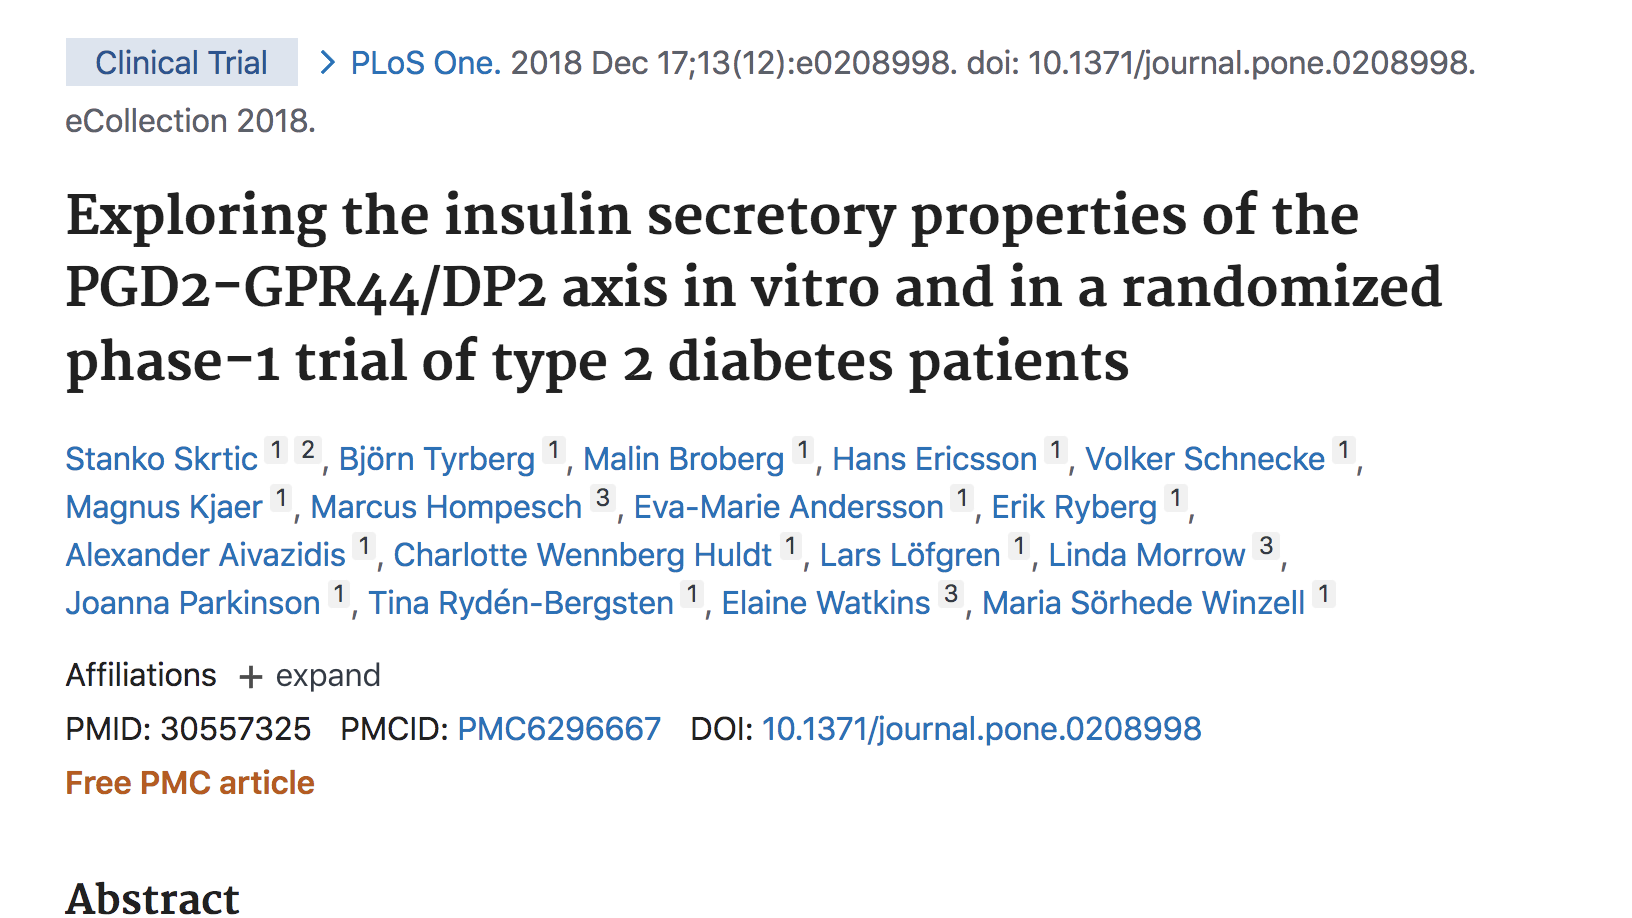 image of Exploring the insulin secretory properties of the PGD2-GPR44/DP2 axis in vitro and in a randomized phase-1 trial of type 2 diabetes patients.